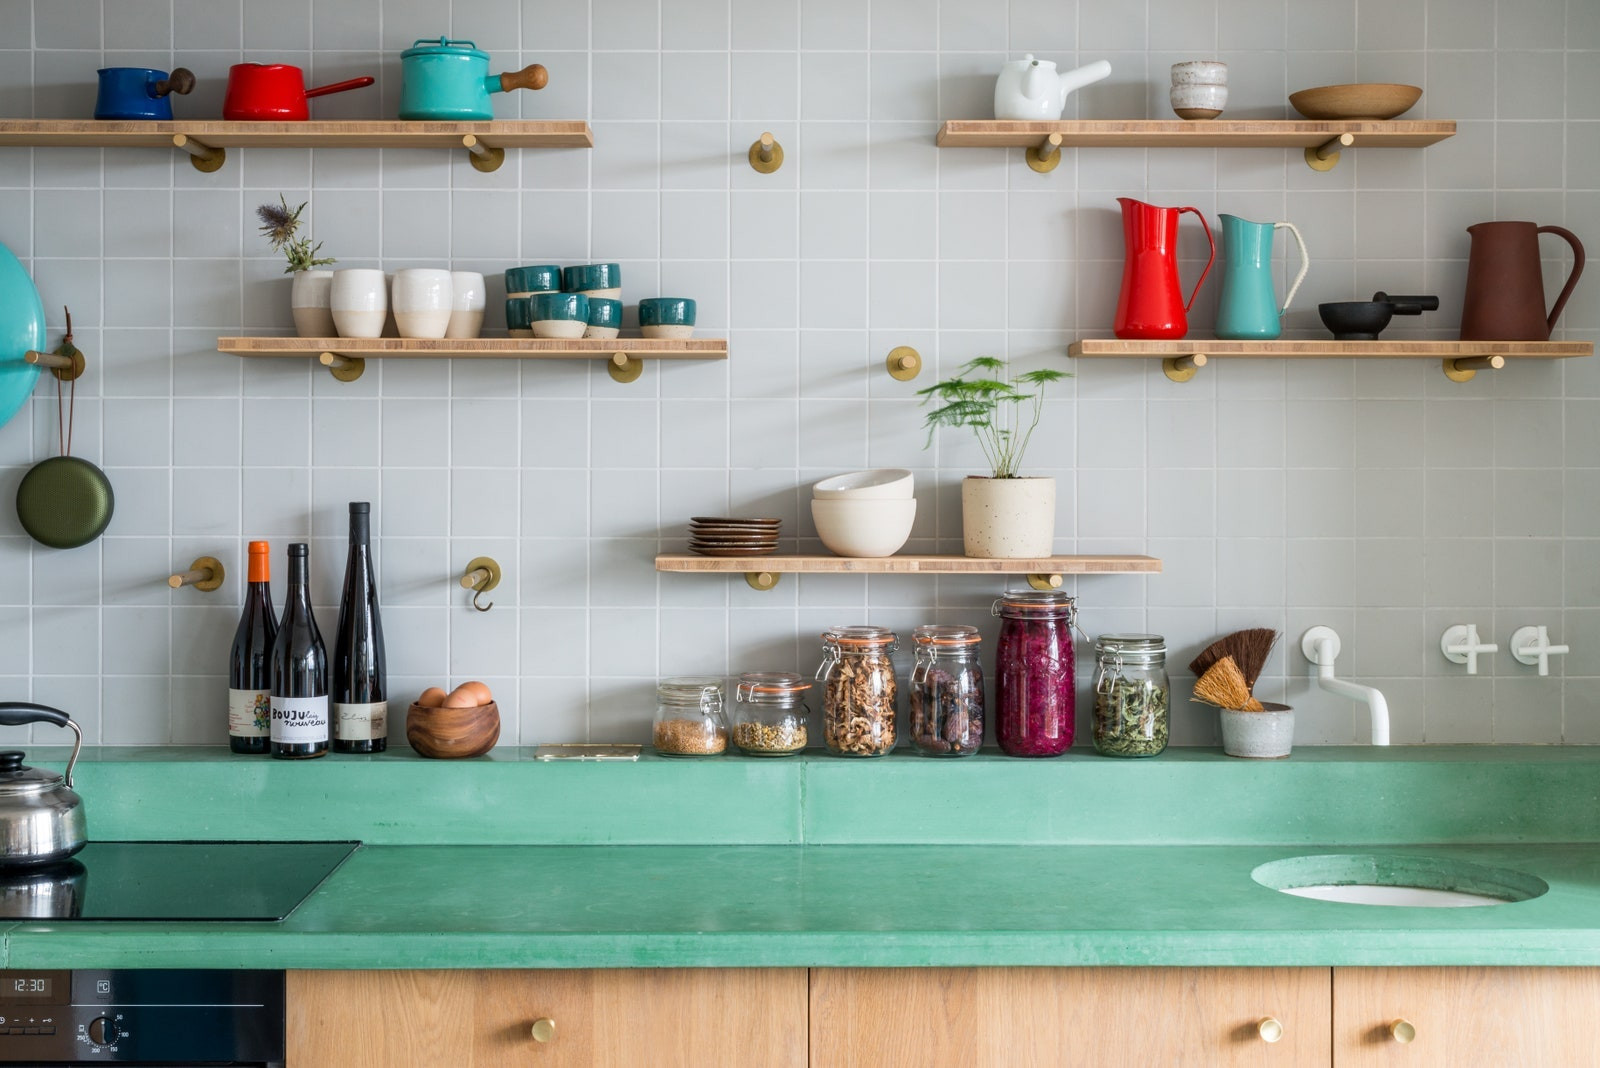 Small Kitchen Design Ideas That Make the Most of a Tiny Space